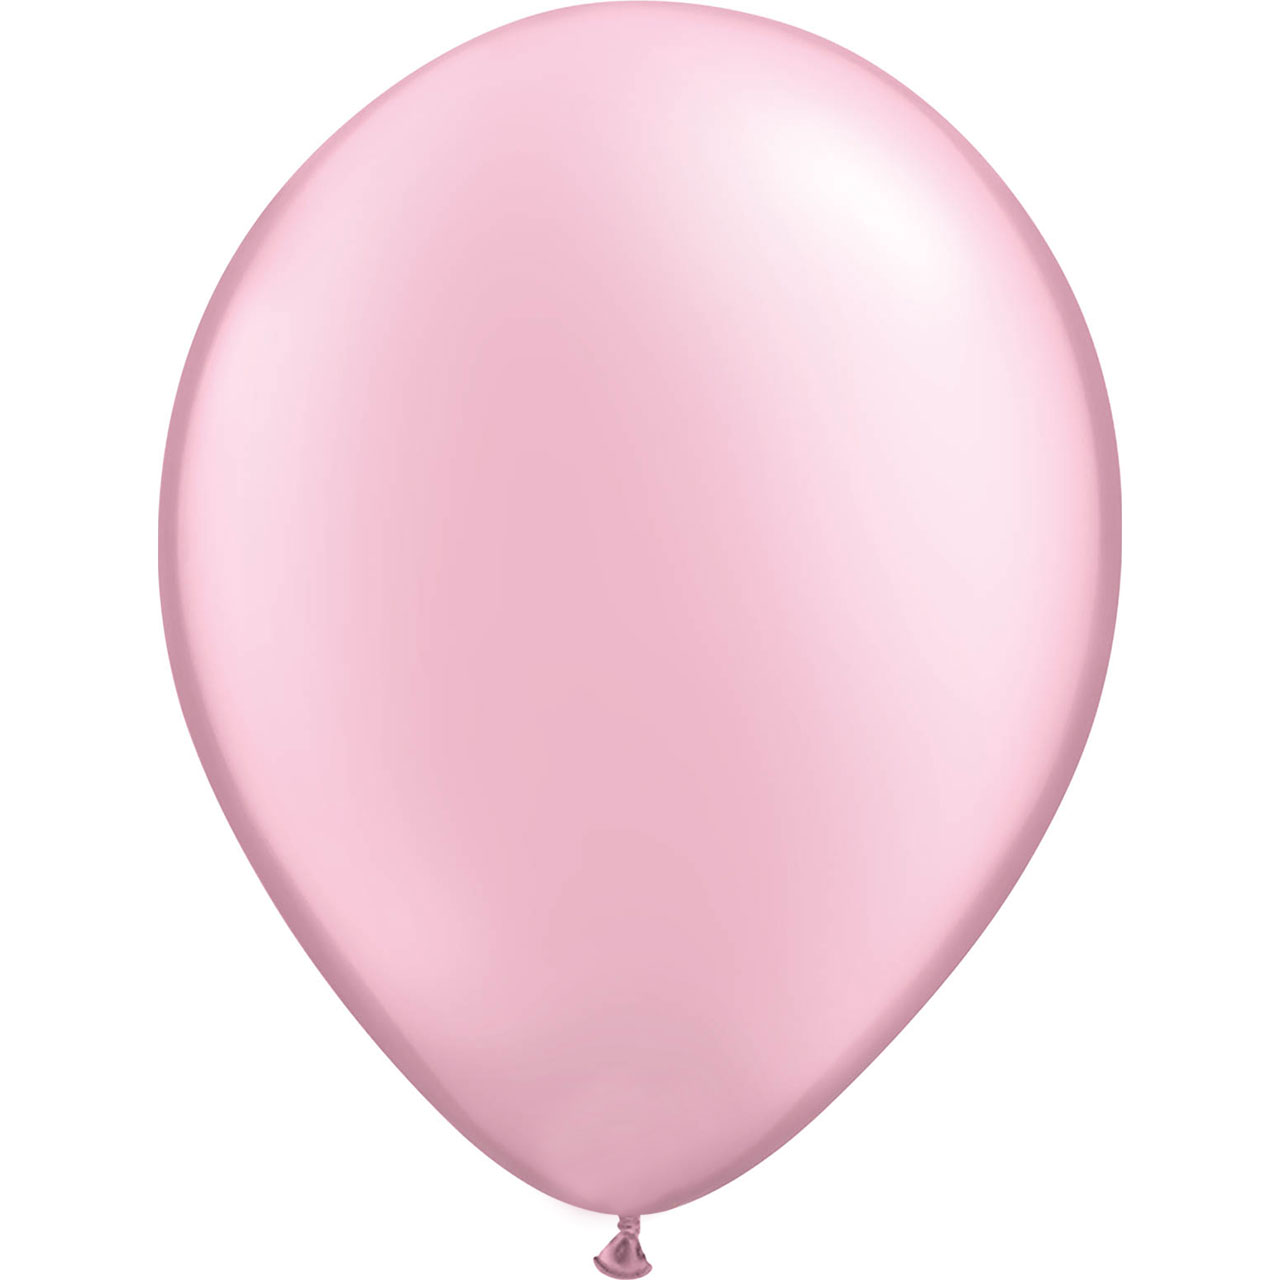 3 Large Pearl Pink Balloons